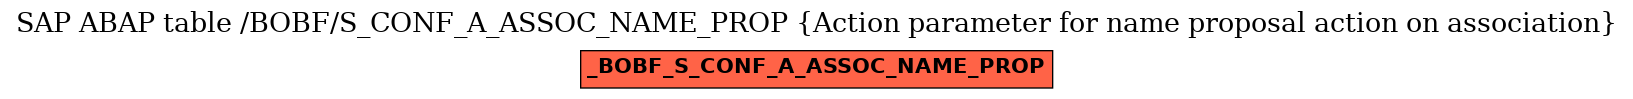 E-R Diagram for table /BOBF/S_CONF_A_ASSOC_NAME_PROP (Action parameter for name proposal action on association)